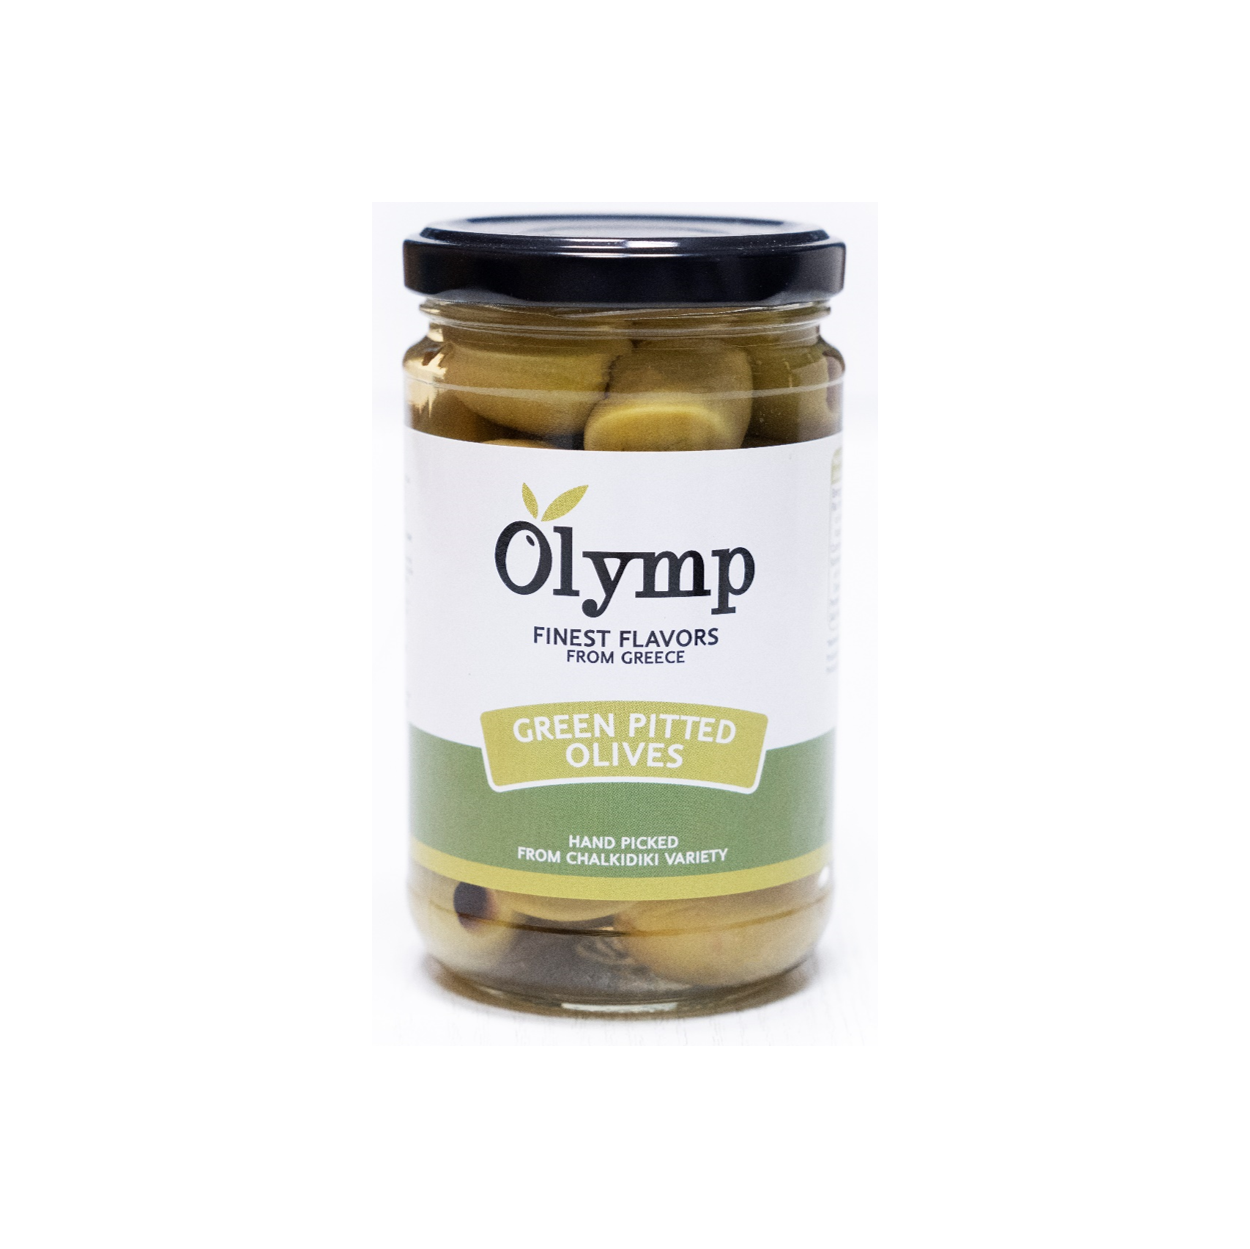 Olymp green pitted olives